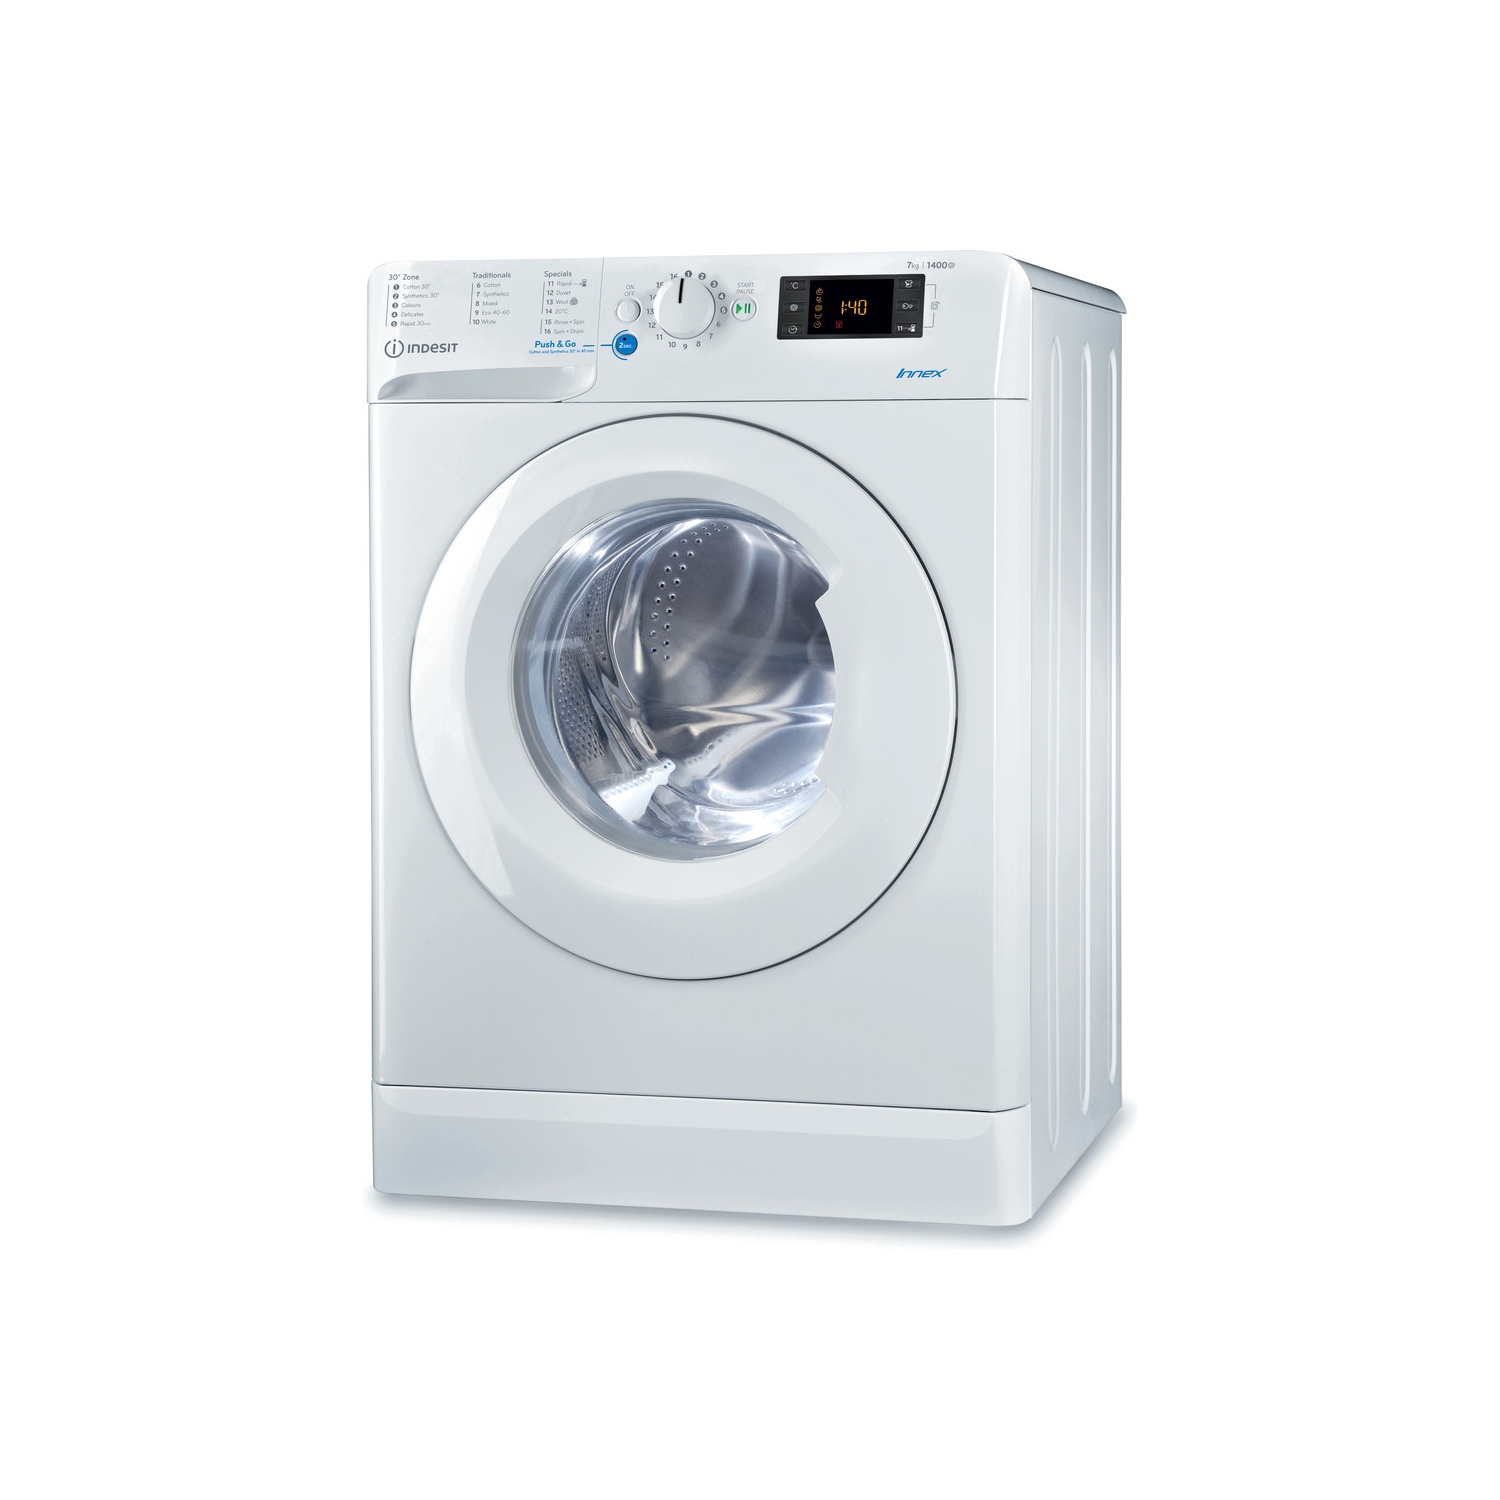 Indesit 7kg 1400 Spin Washing Machine - White - A+++ Rated - 0